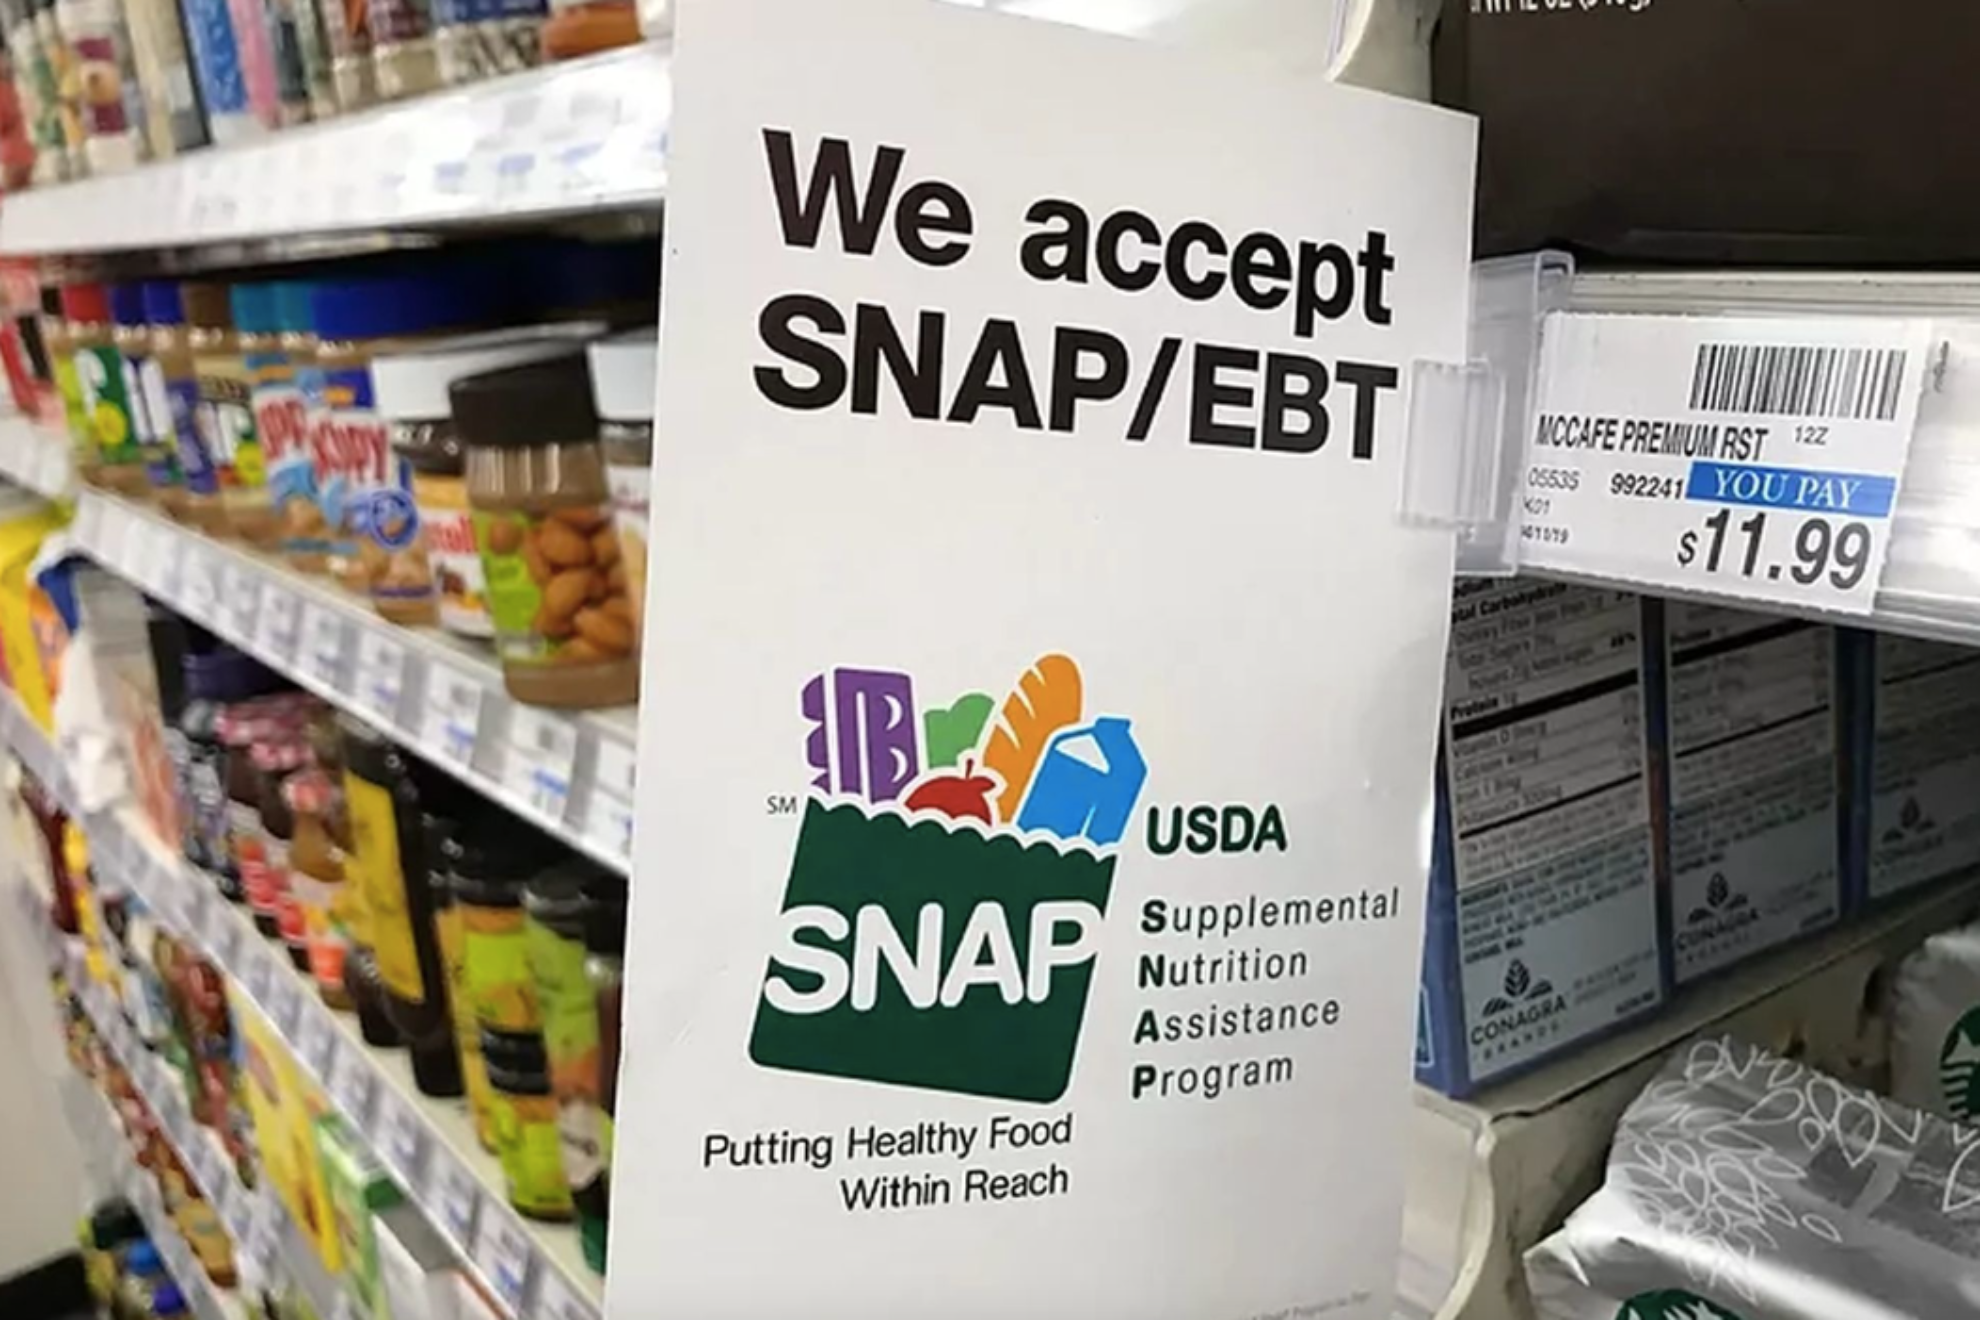 SNAP Benefits Texas Recertification: This is the last day of September to renew your benefits